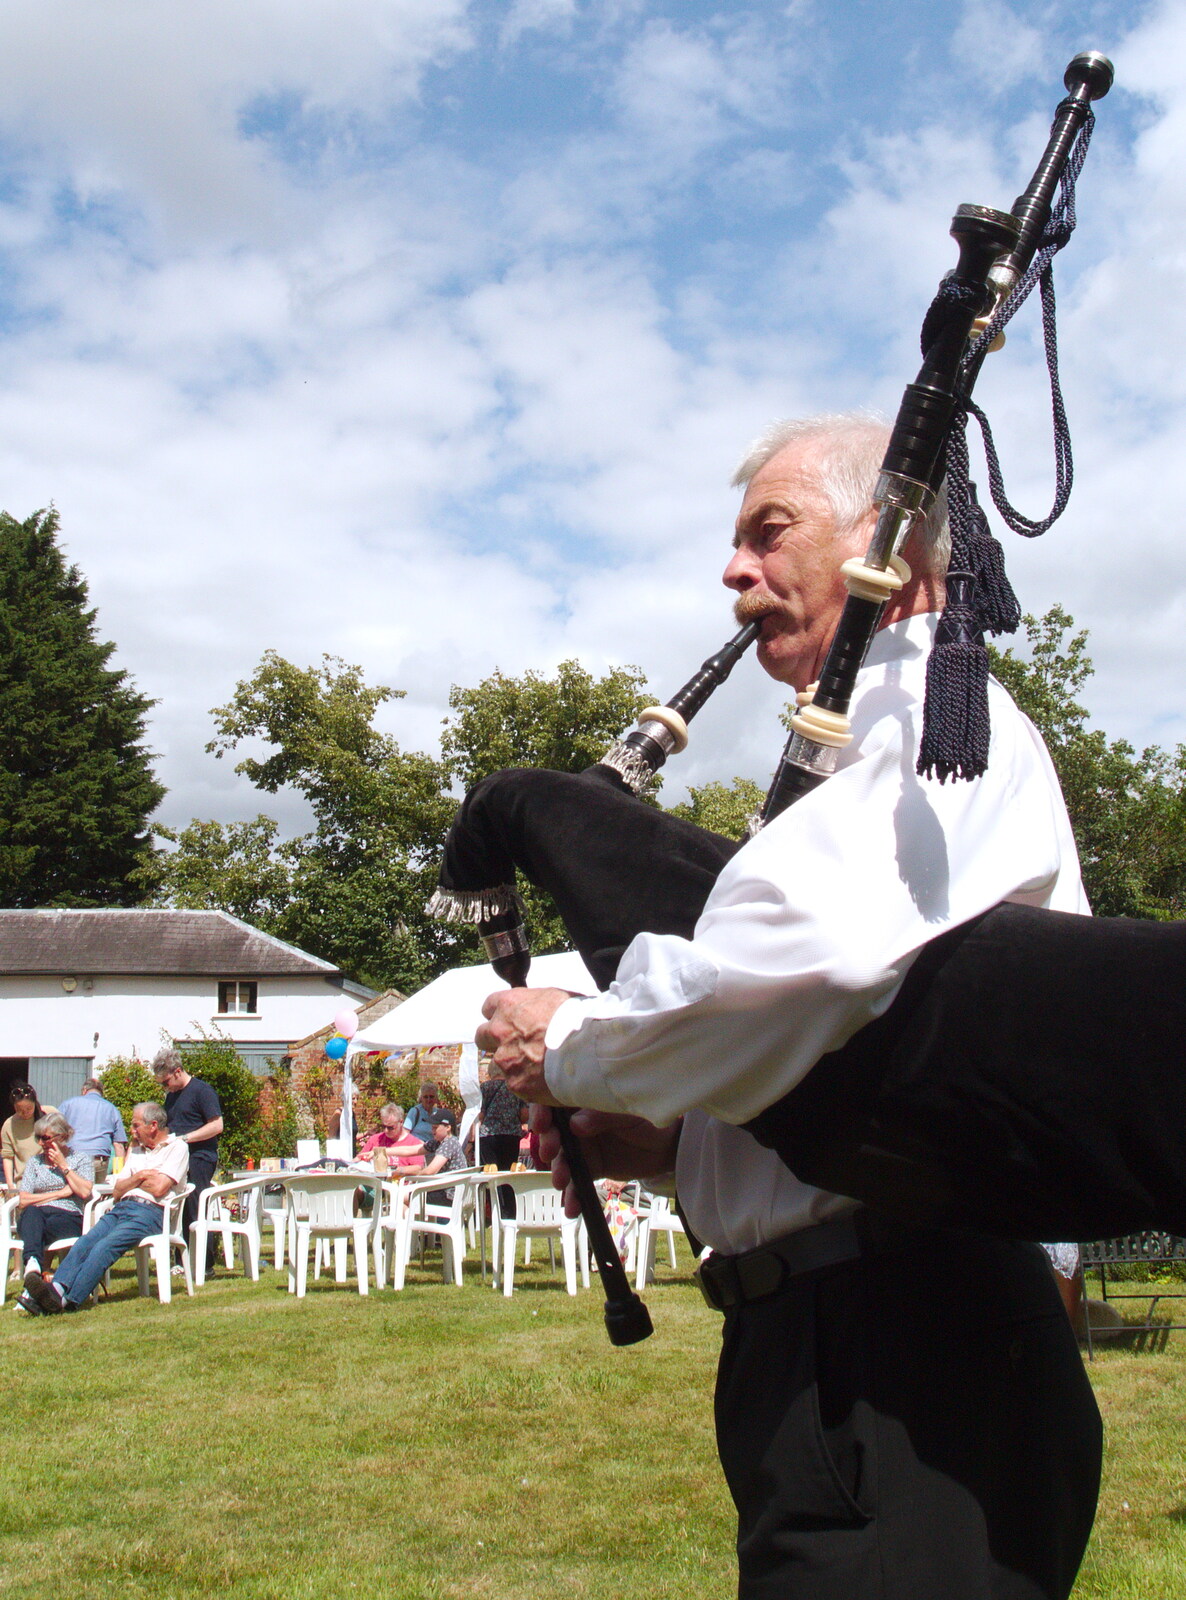 The dude on the bagpipes from GSB at the Summer Fete, Market Weston, Suffolk - 20th July 2019